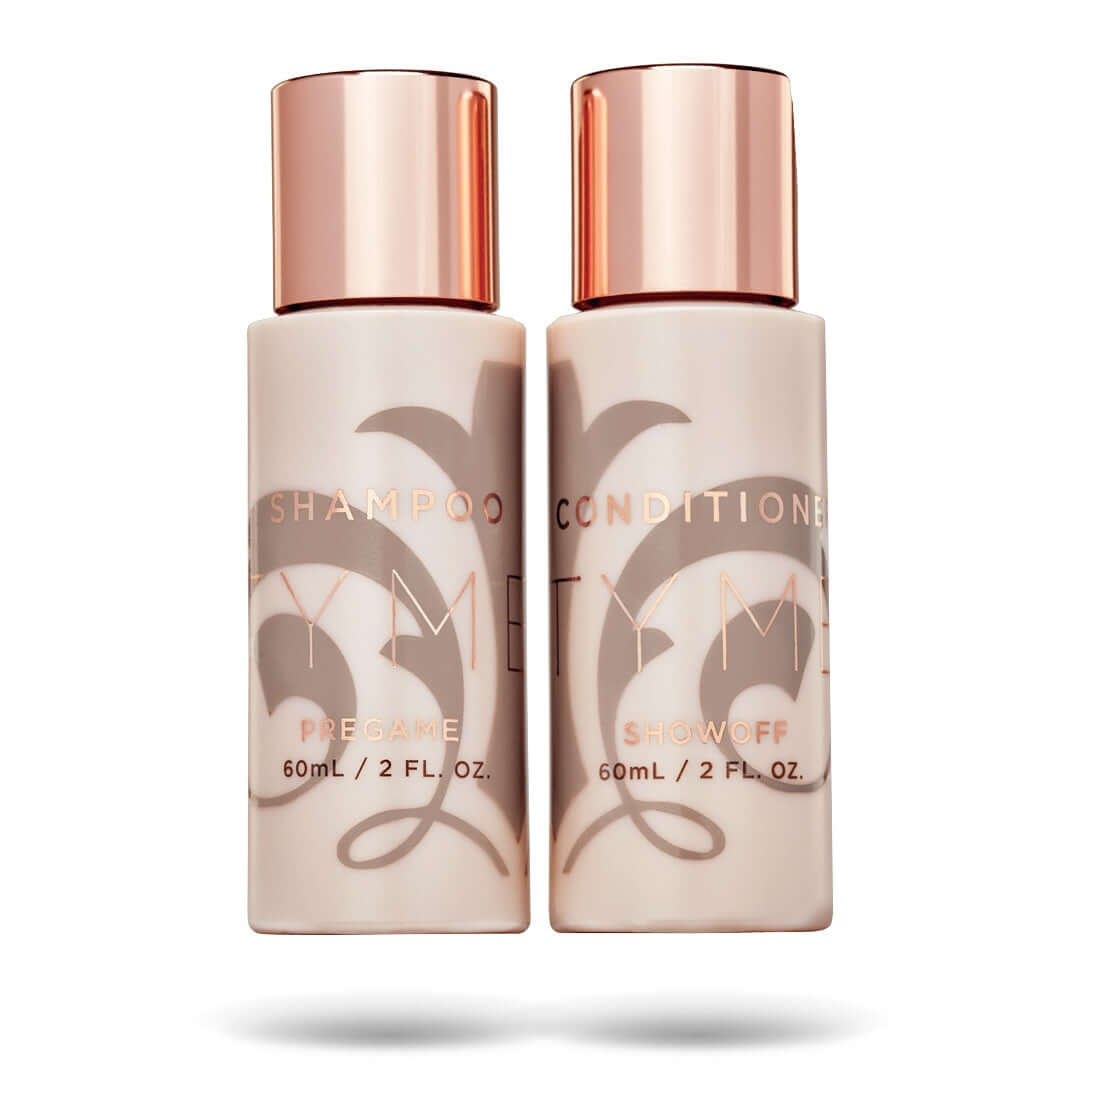 Travel size 2 ounce TYME Pregame Shampoo and Showoff Conditioner in a beige bottles with rose gold details.